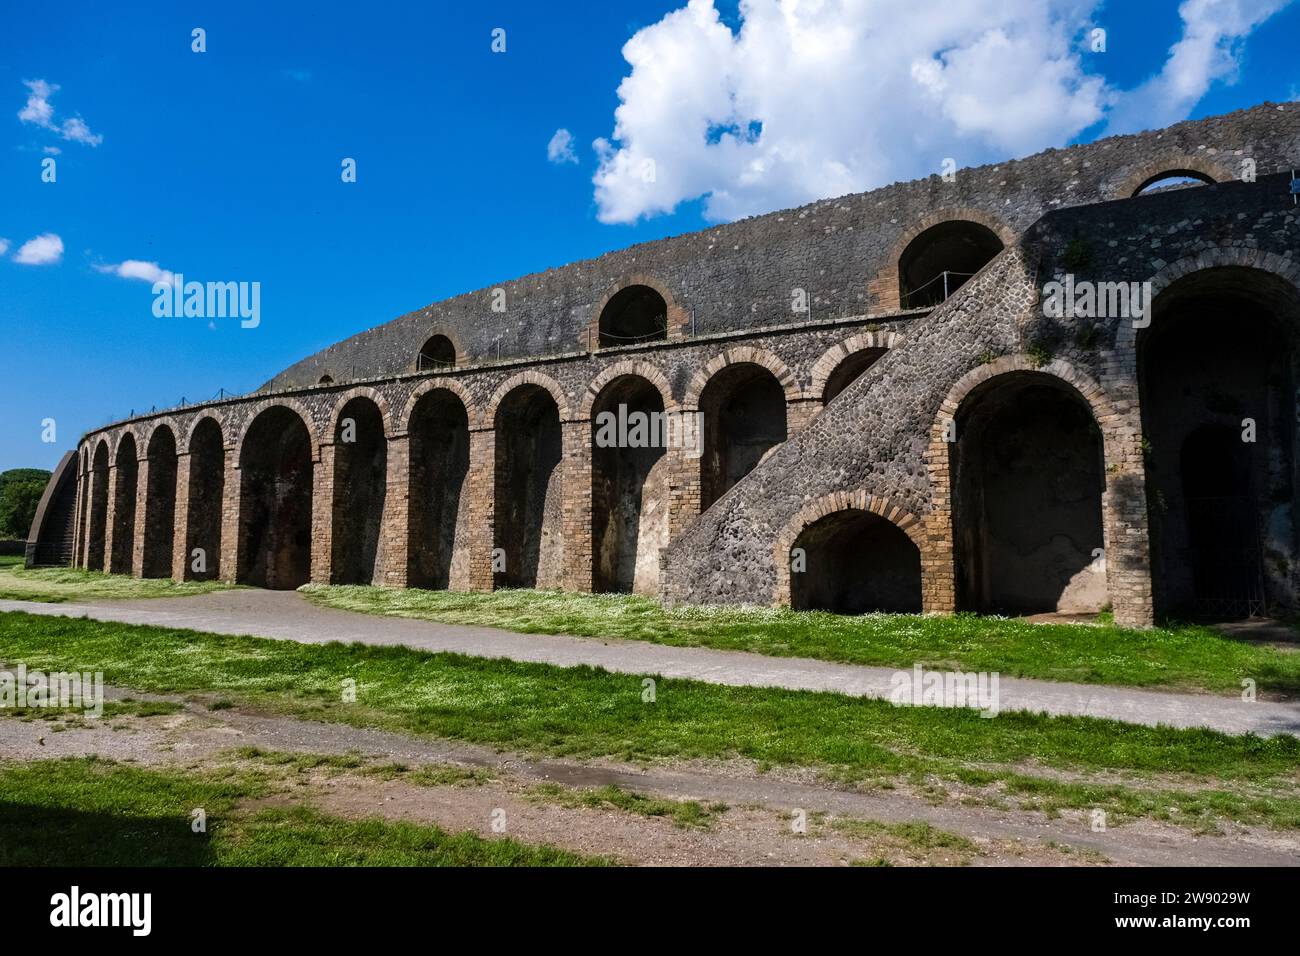 Anfiteatro romano di Pompei in the archaeological site of Pompeii, an ancient city destroyed by the eruption of Mount Vesuvius in 79 AD. Stock Photo